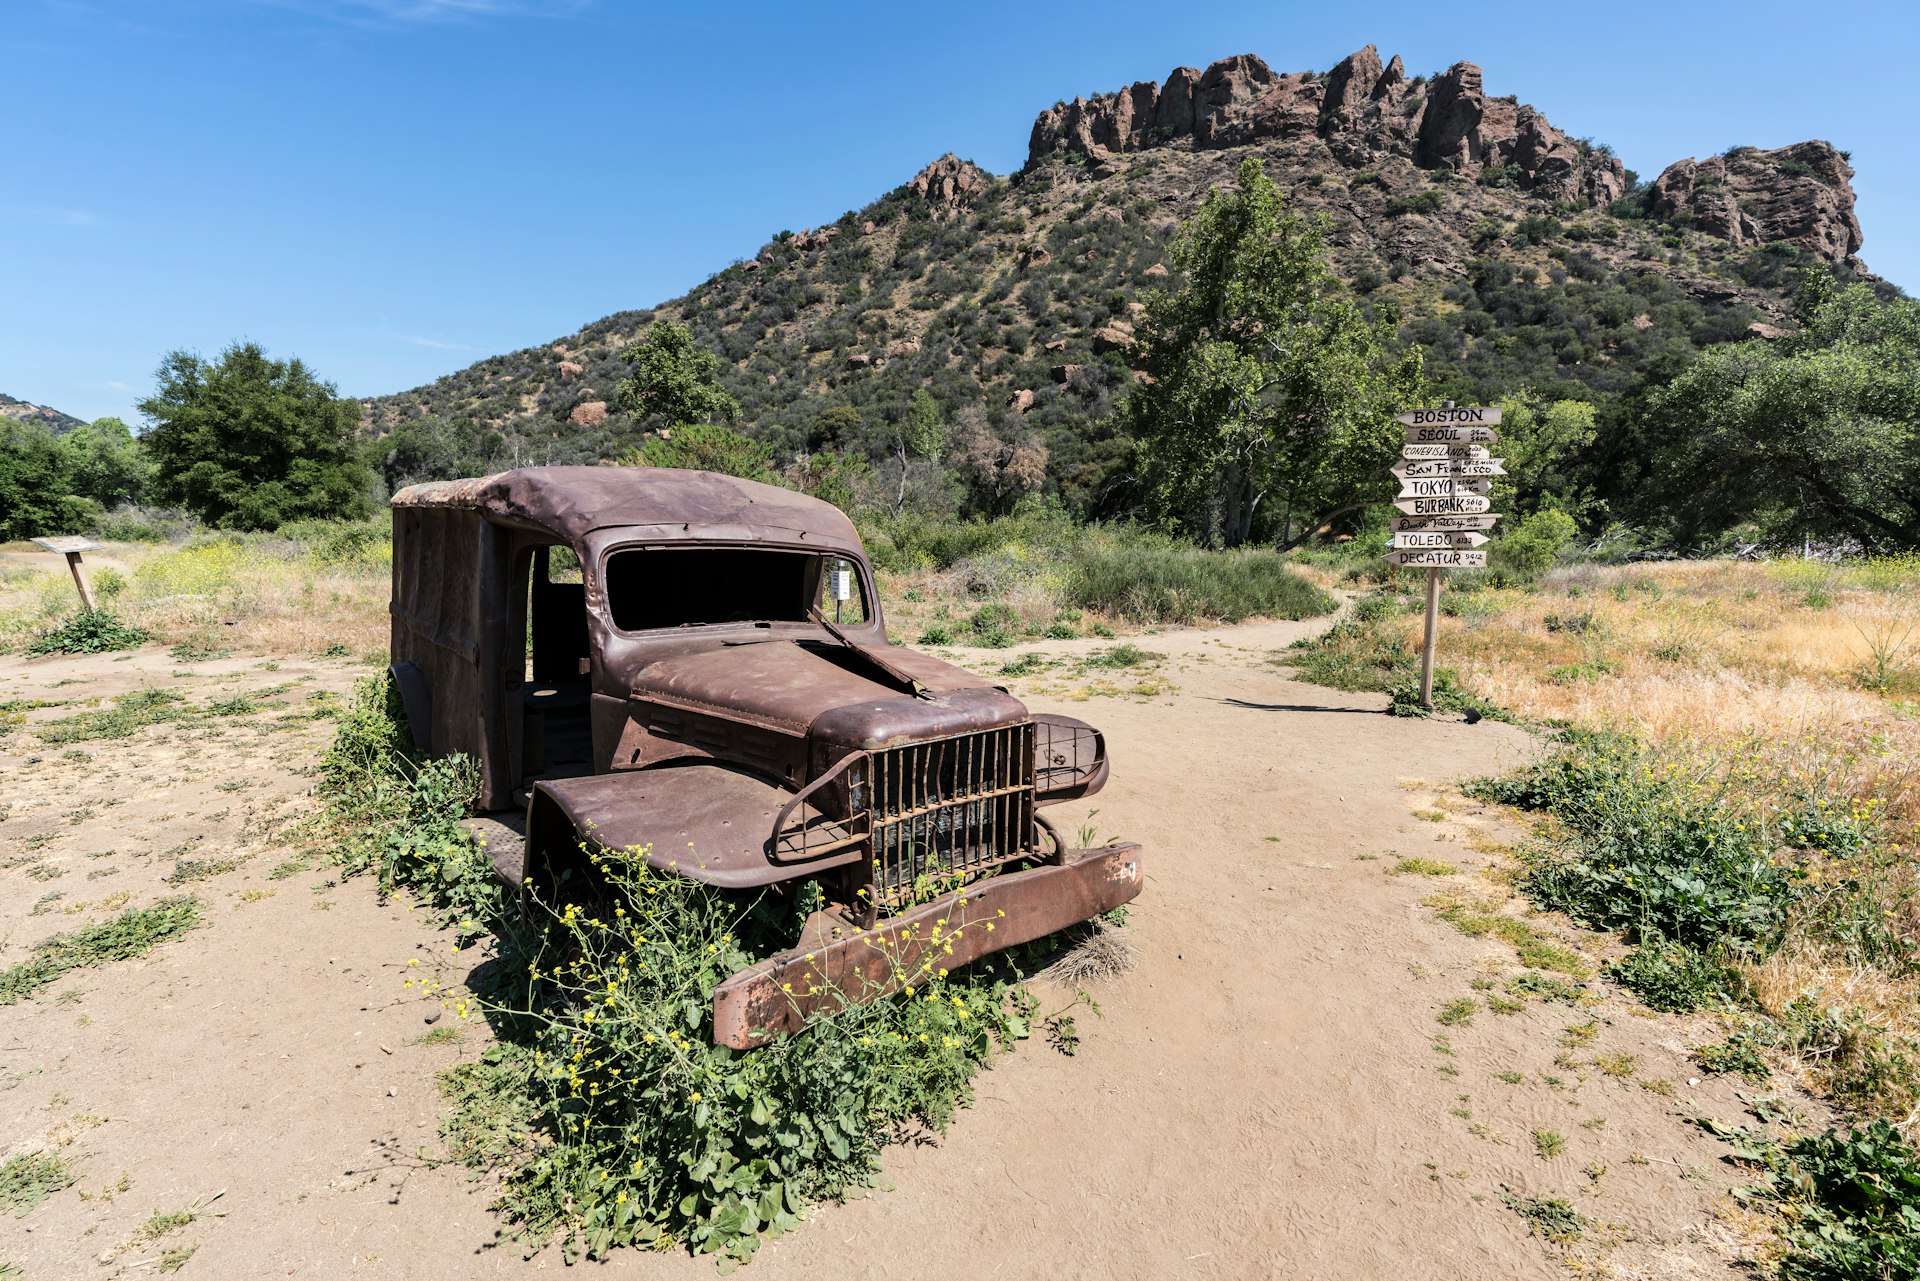 A rusted truck once featured on the TV series “M*A*S*H” photographed in Malibu Creek State Park